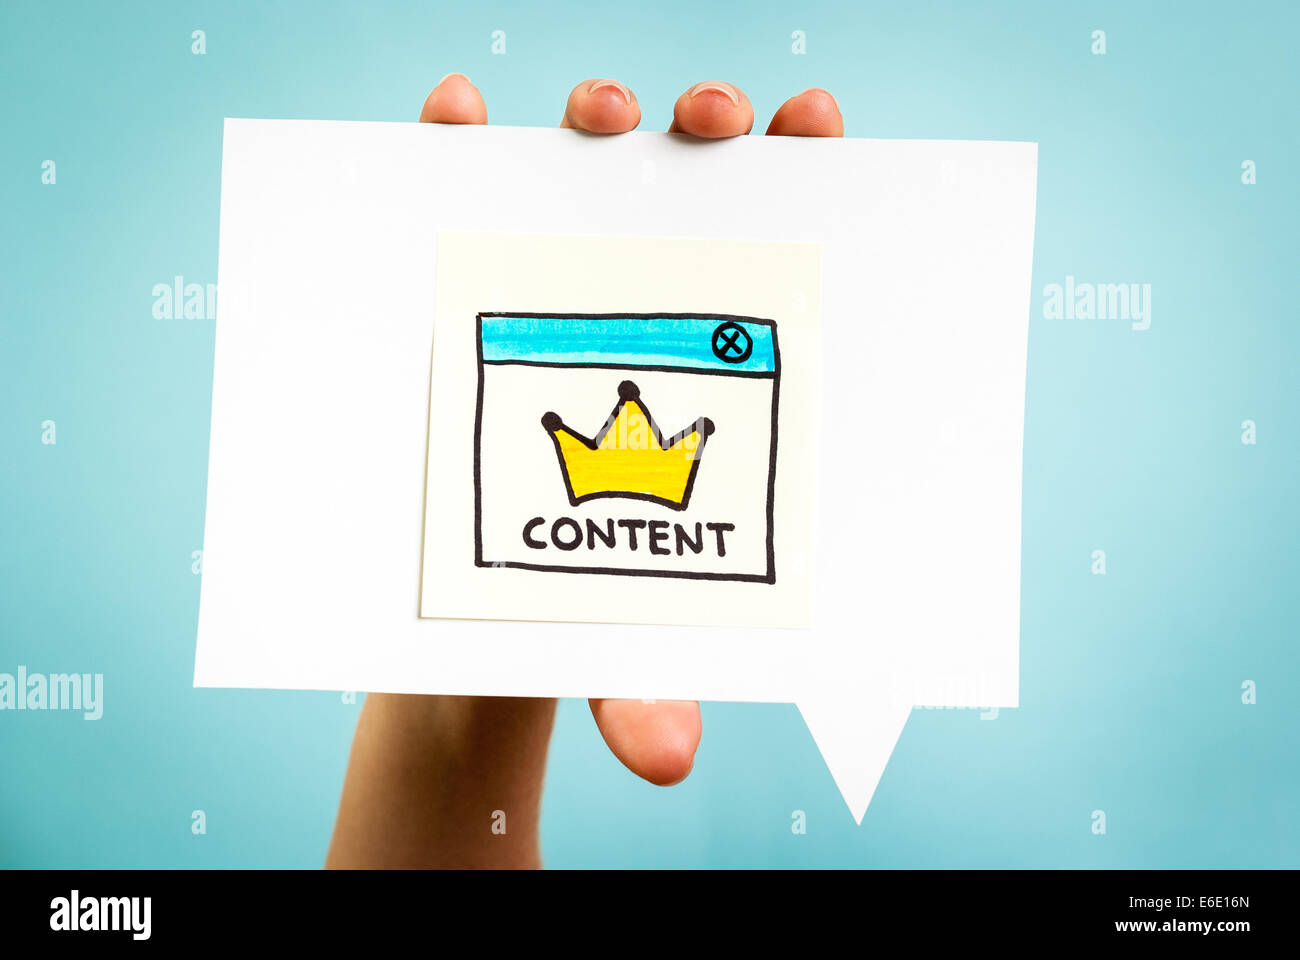 Yellow crown with content word on speech bubble and blue background. Social media concept. Stock Photo